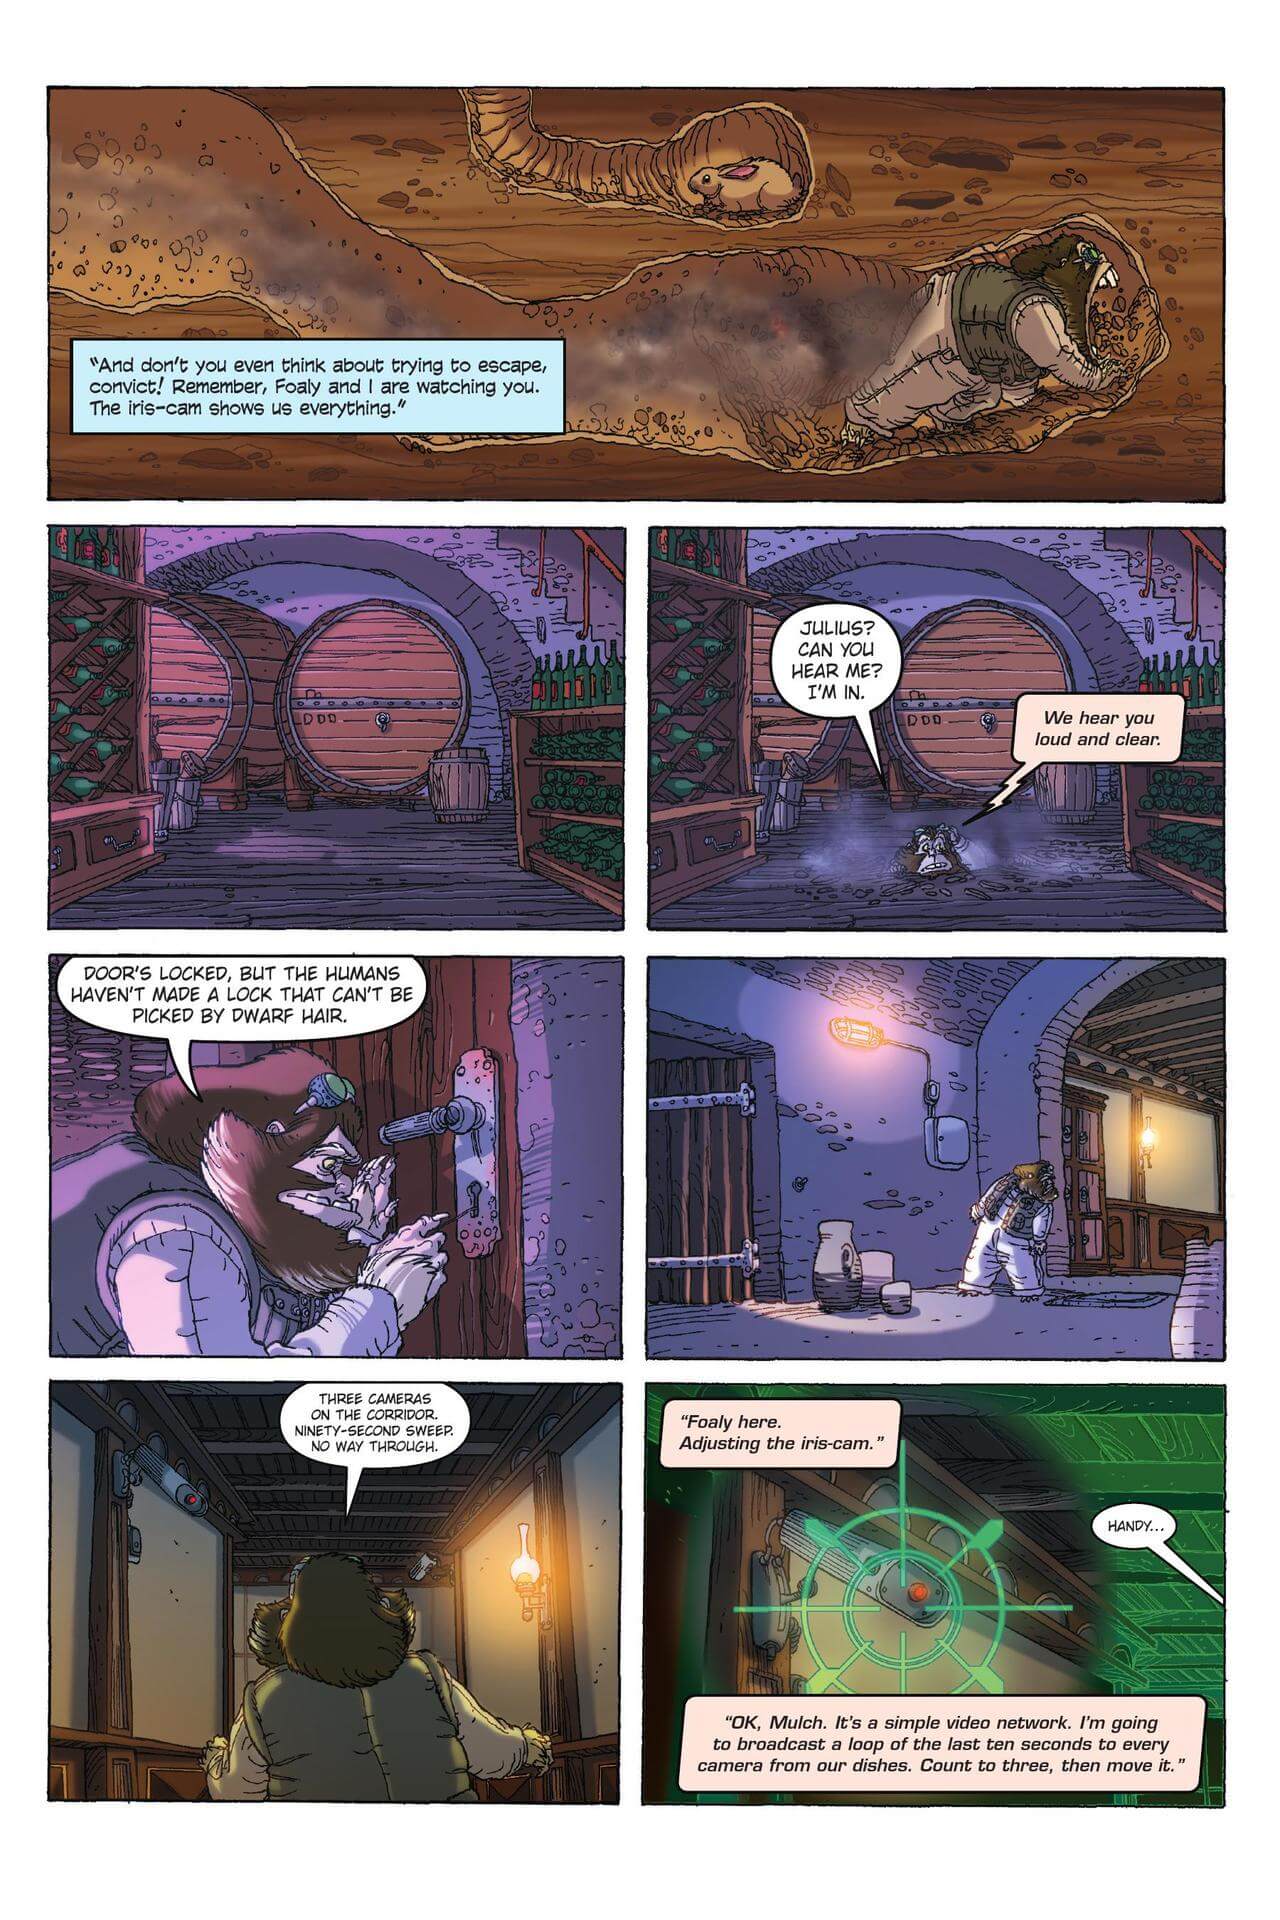 page 72 of artemis fowl the graphic novel